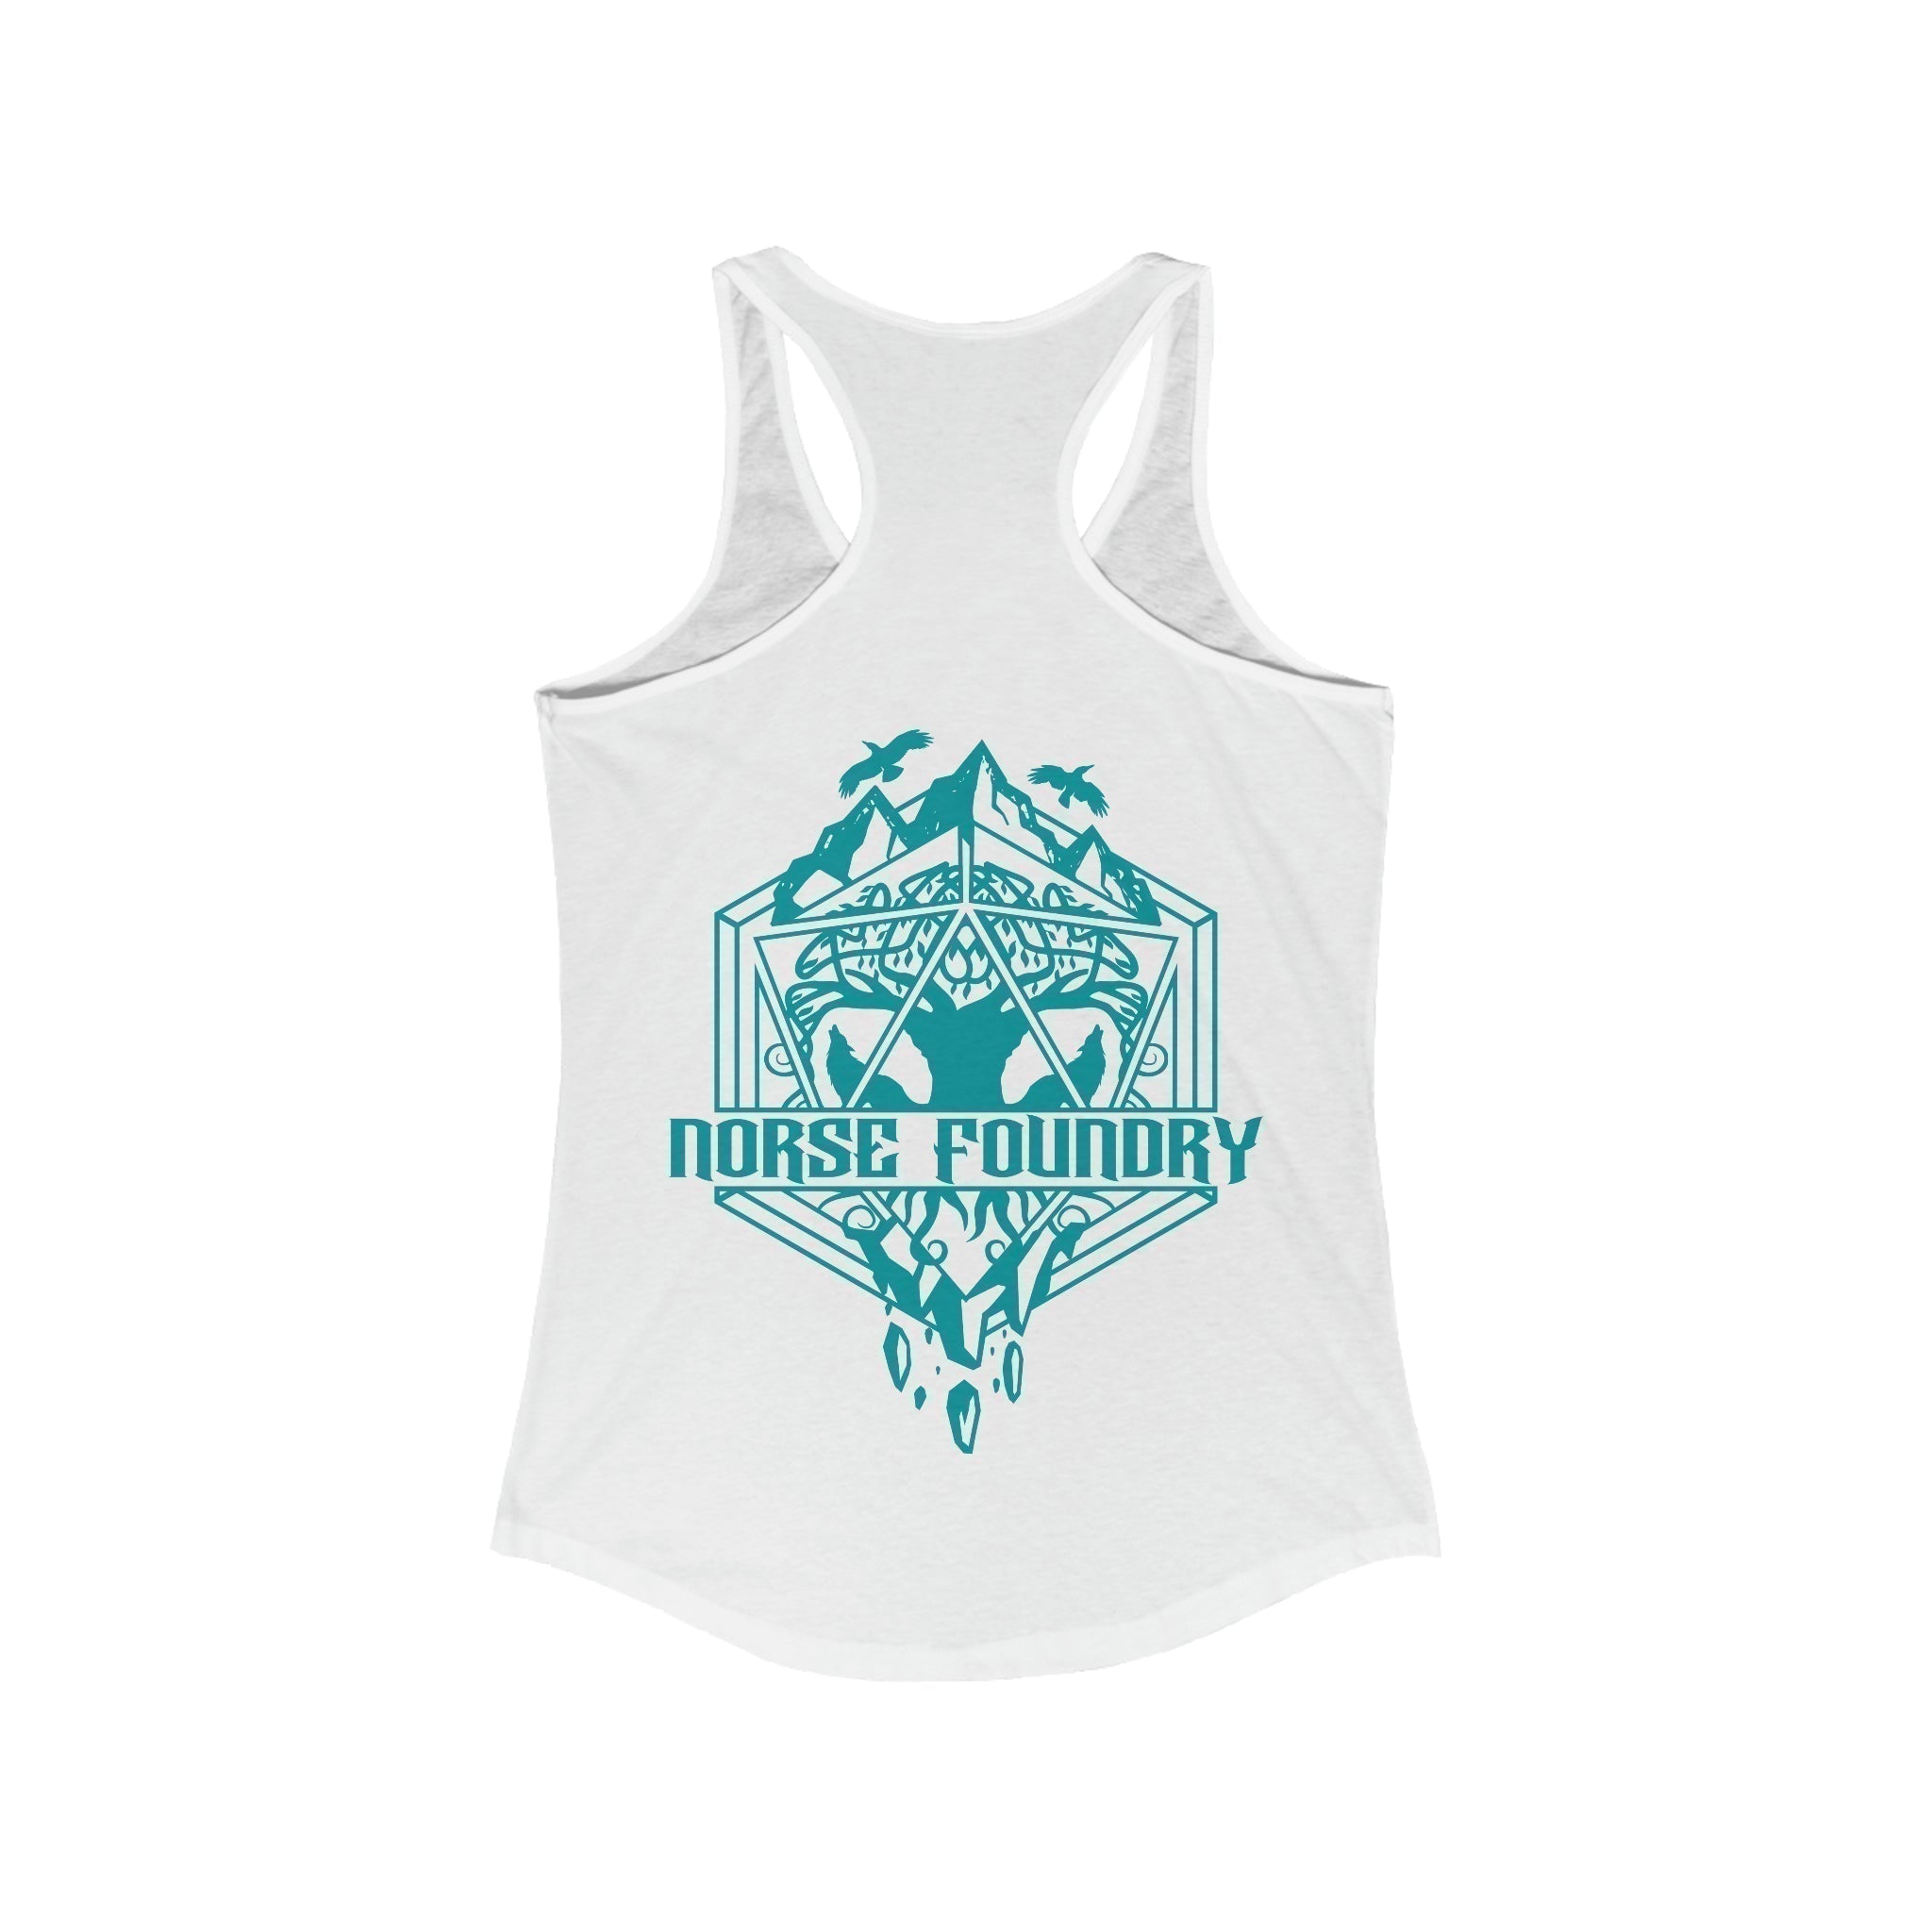 Roll for Adventure - Norse Foundry Women's Tank Top - 10264515615403794965